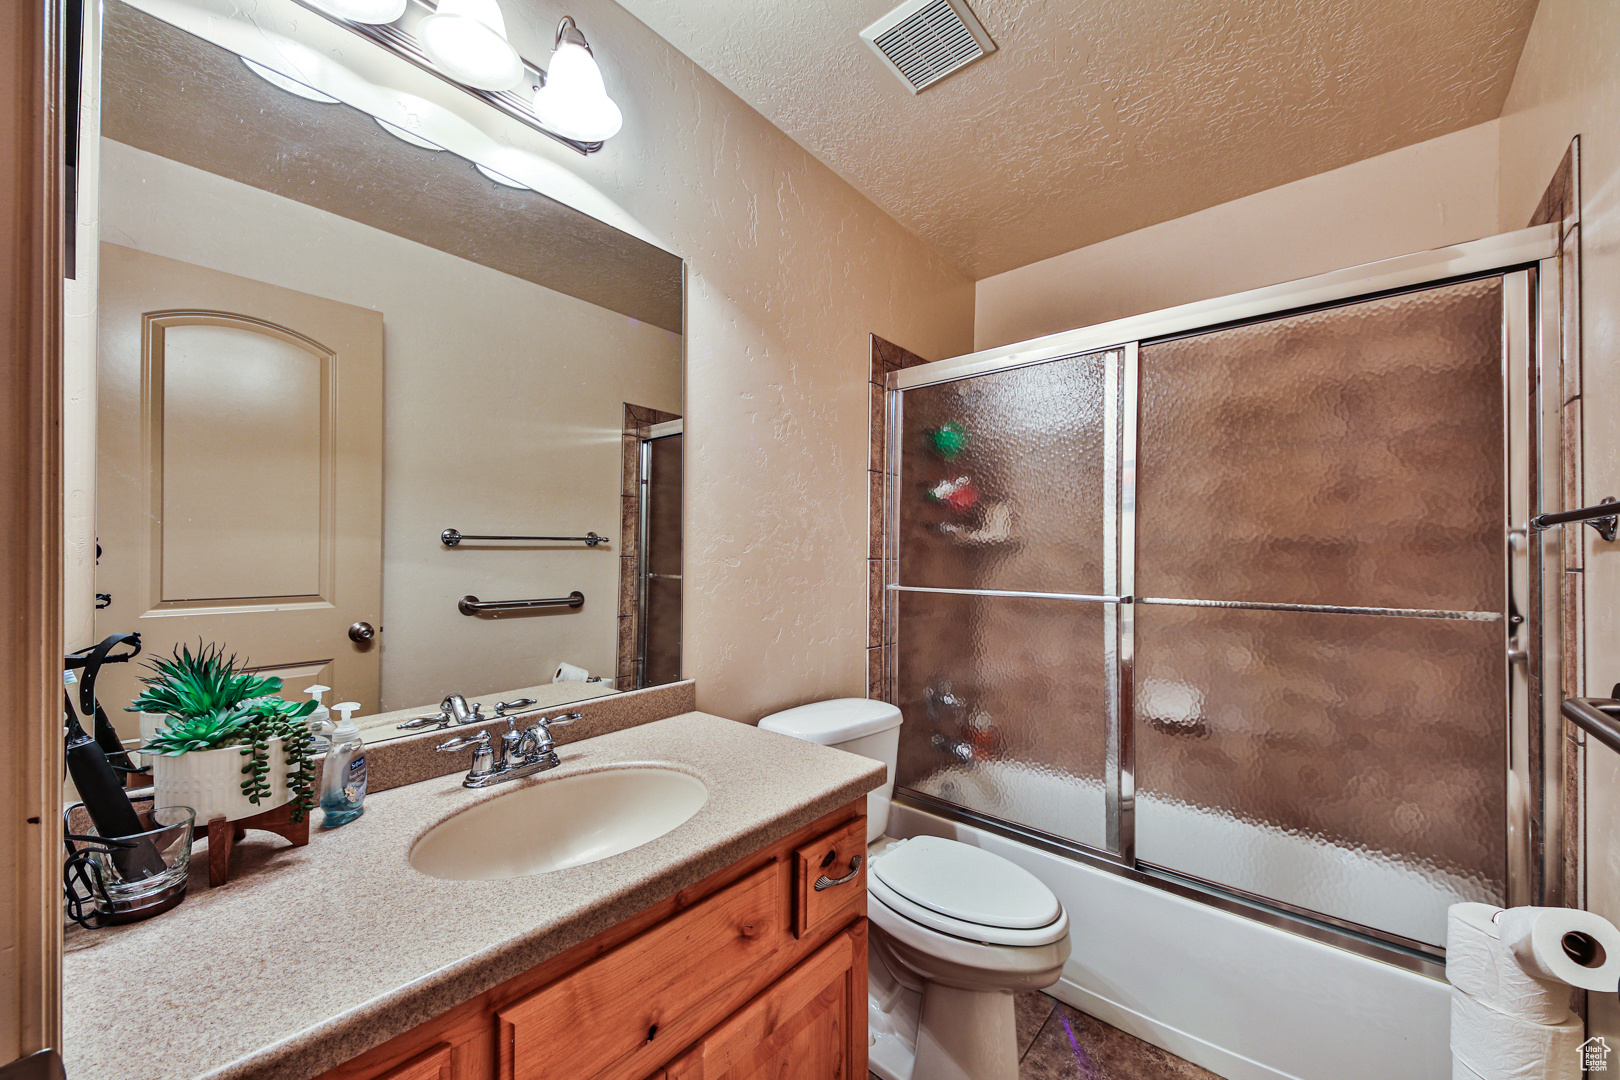 Full bathroom with enclosed tub / shower combo, oversized vanity, tile flooring, toilet, and a textured ceiling